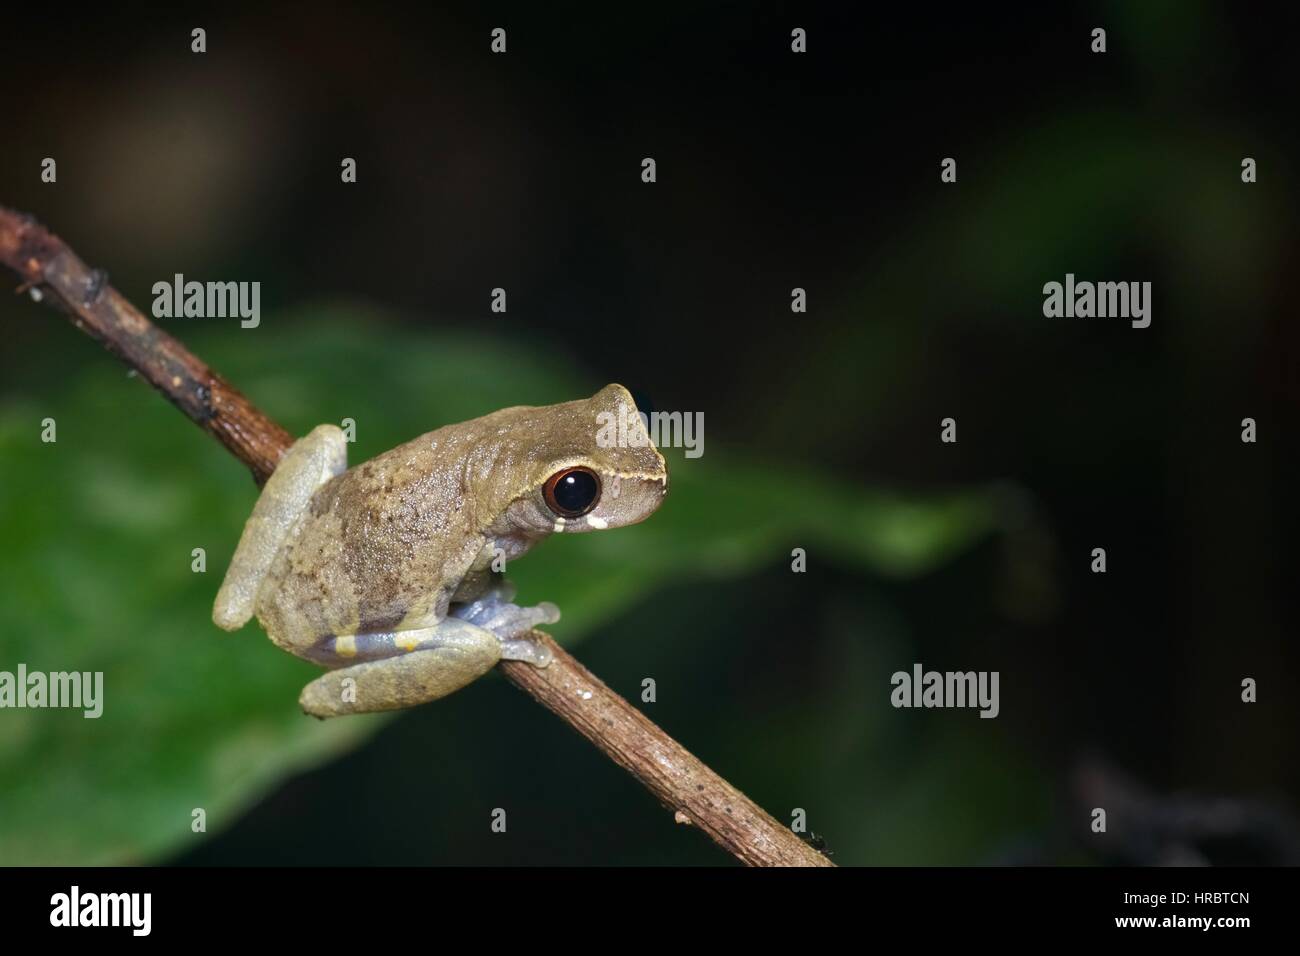 A Short-nosed Tree Frog (Dendropsophus brevifrons) perched on a thin branch in the Amazon rainforest in Loreto, Peru Stock Photo